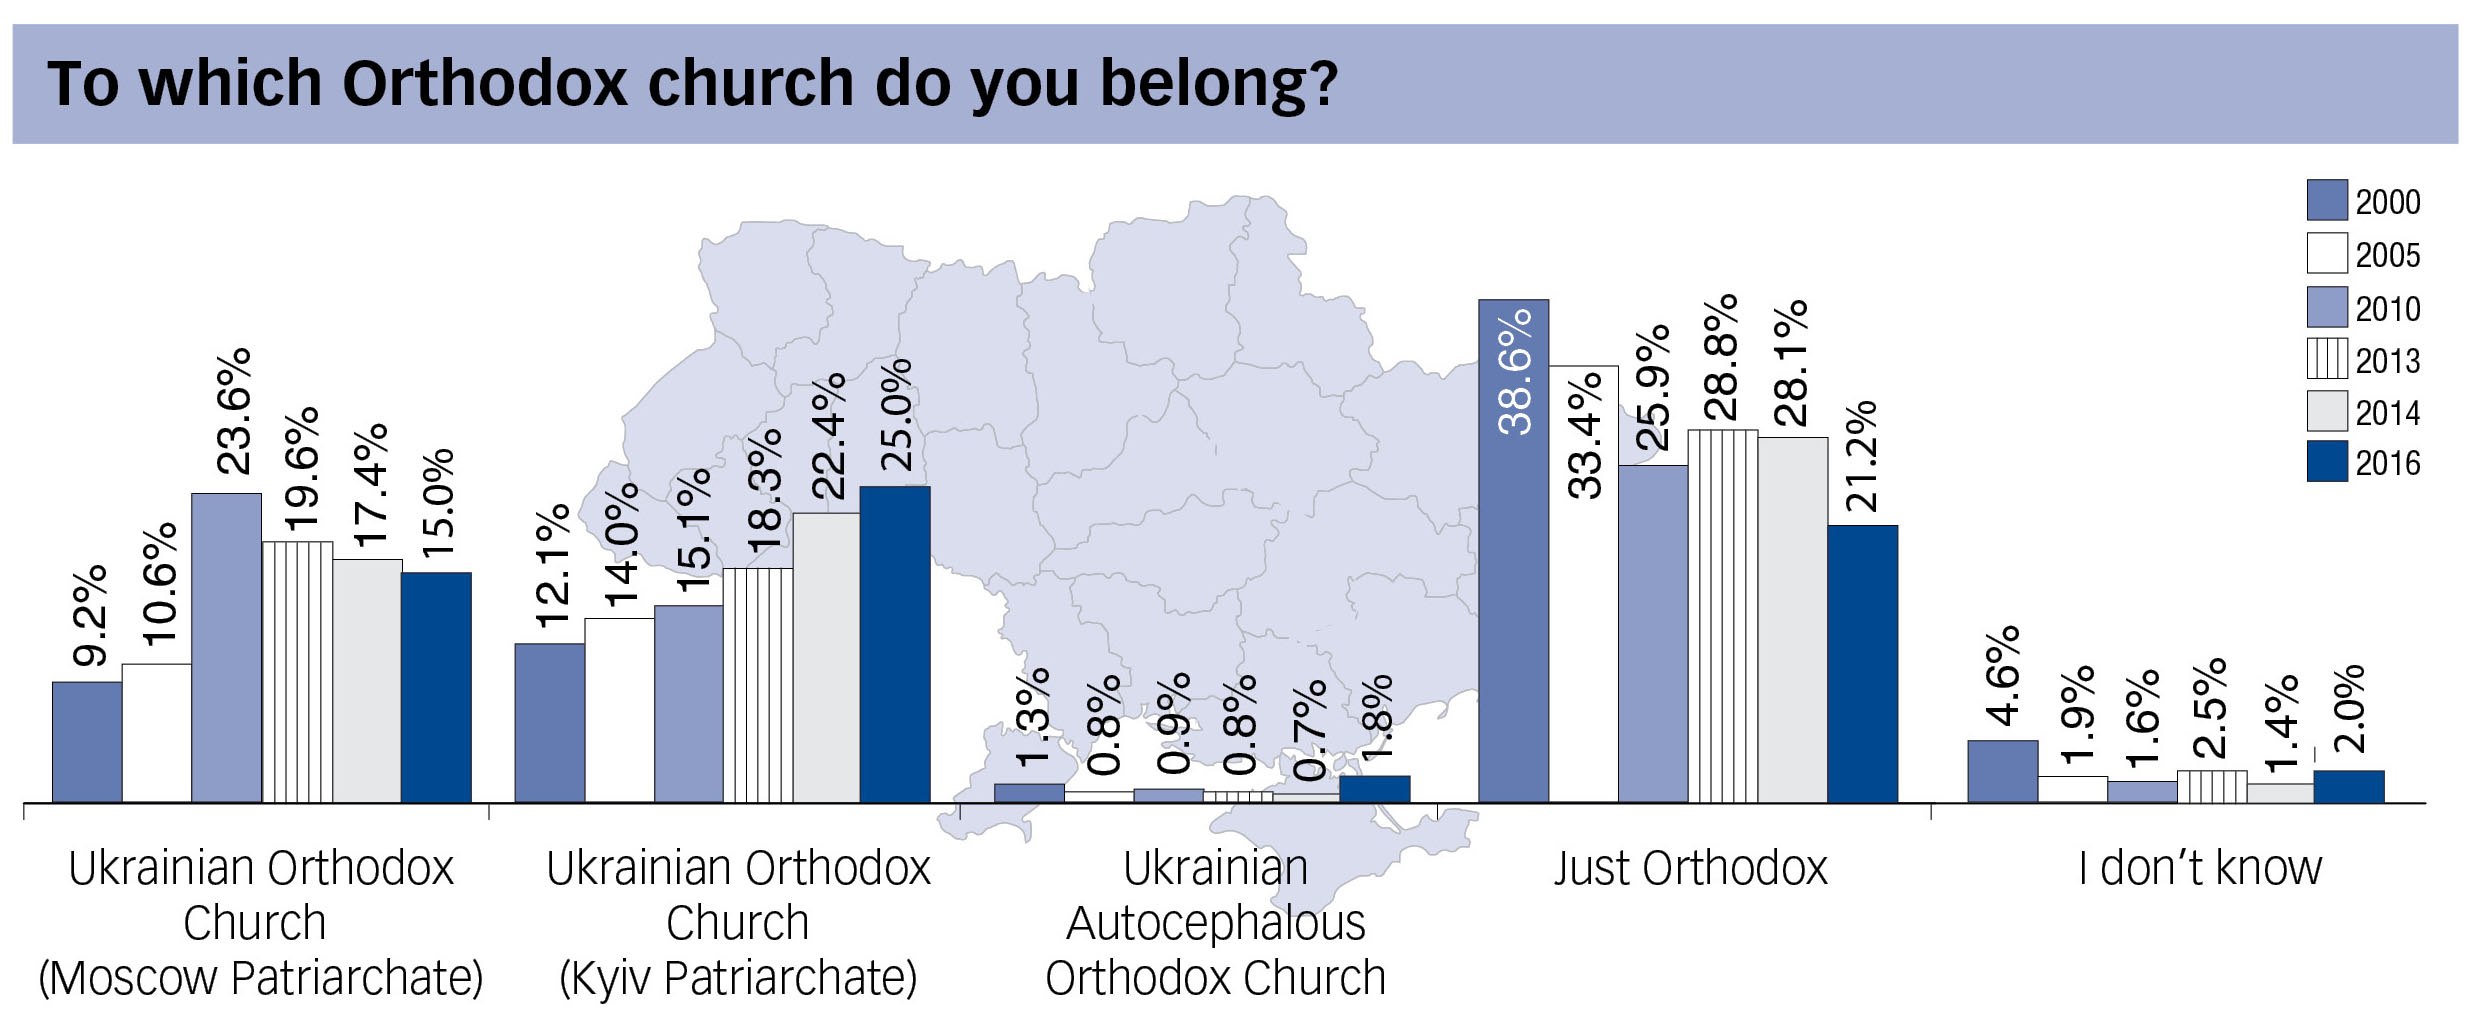 More Orthodox Christians in Ukraine identiy with the Kyiv Patriarchate than the Moscow Patriarchate amid Russia's war against Ukraine, according to a nationwide survey of 2,018 people on March 2016 by the Razumkov Center.